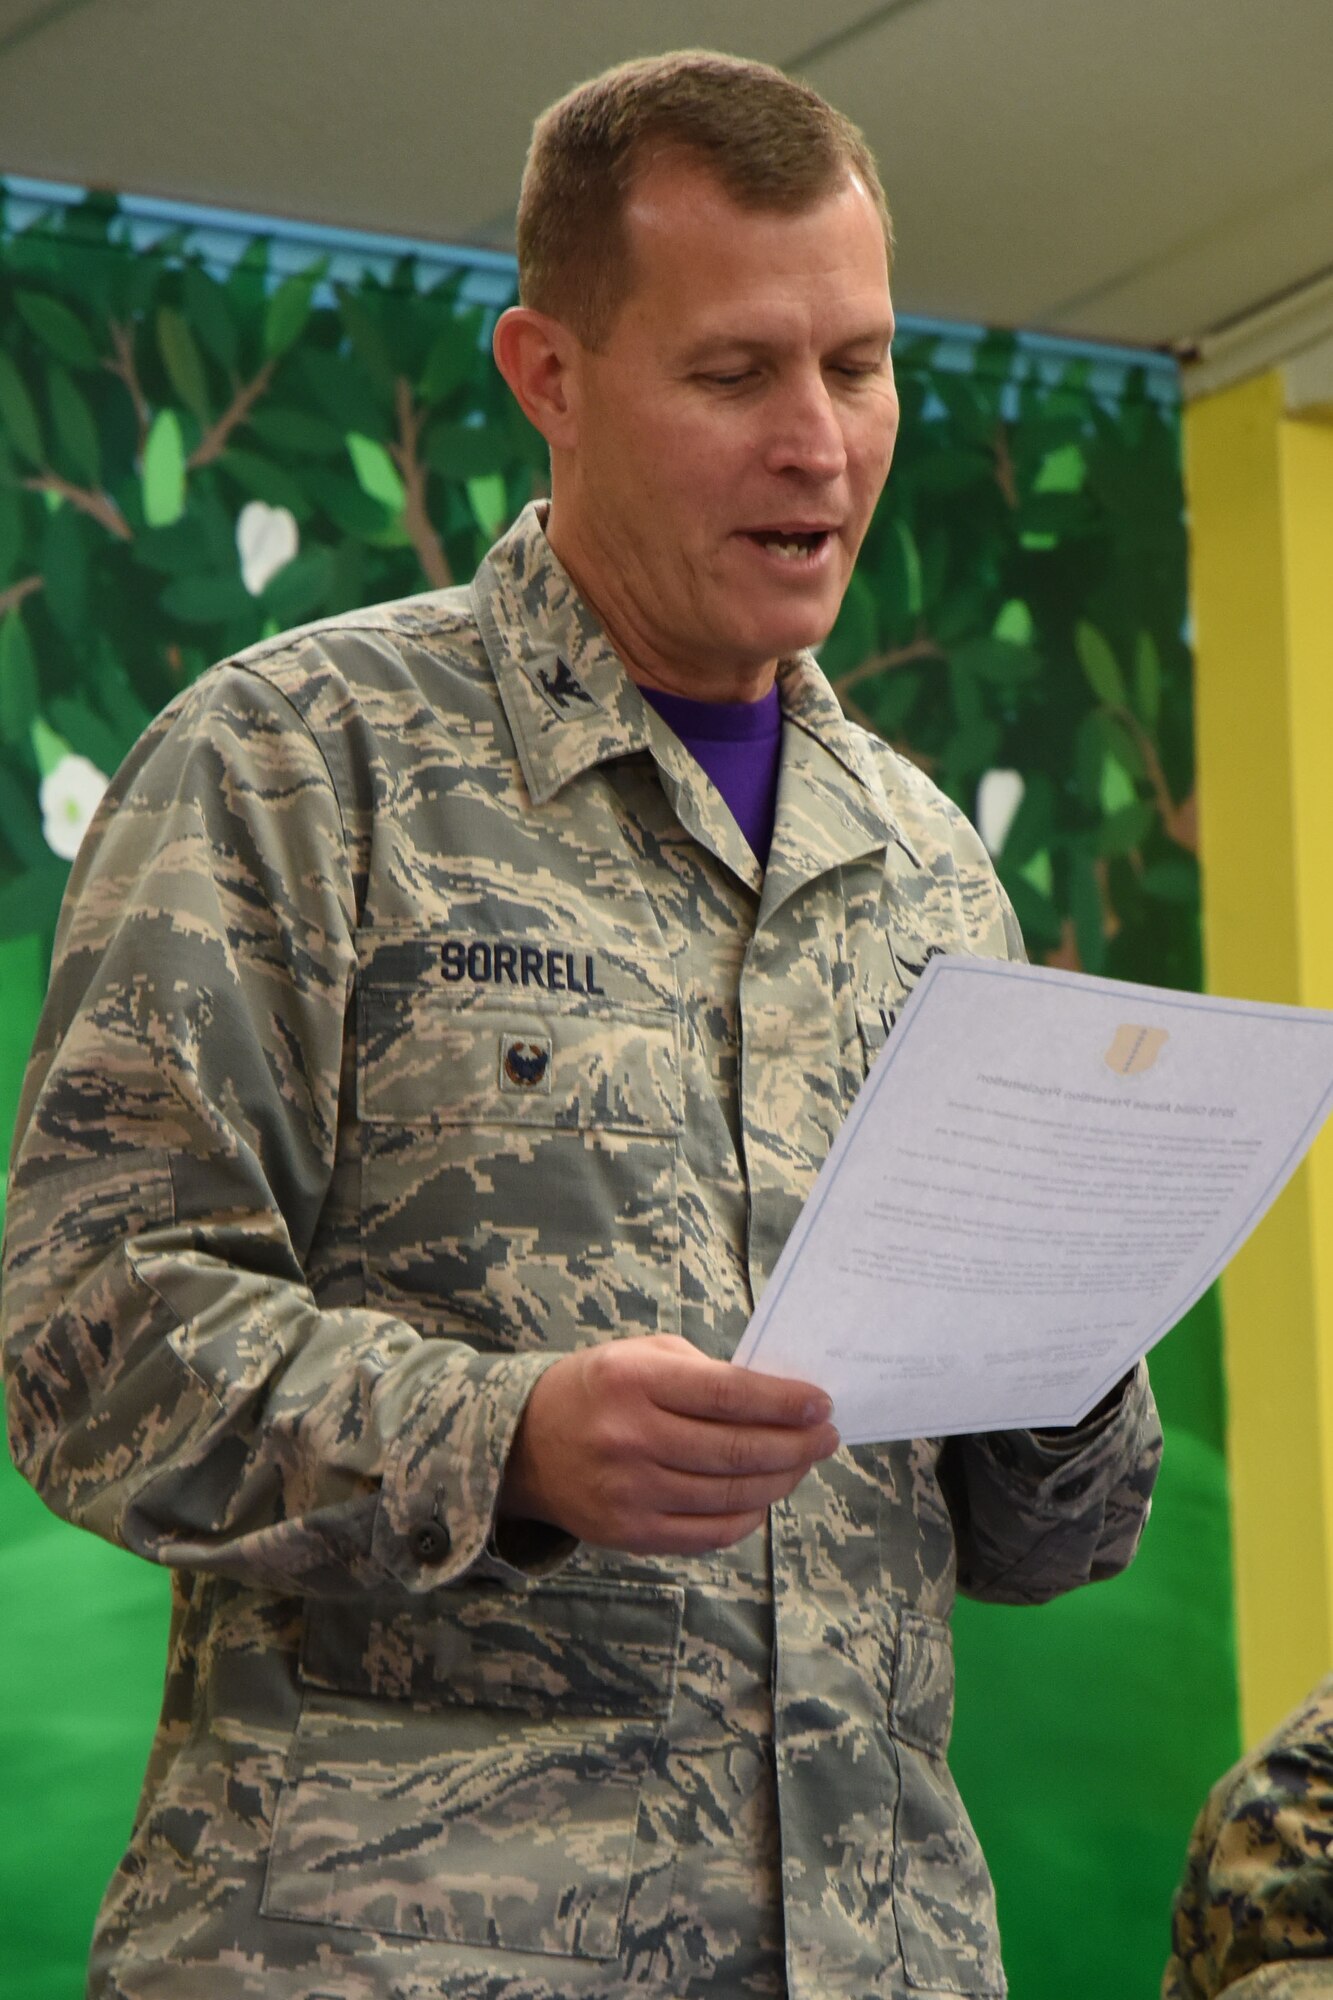 U.S. Air Force Col. Jeffrey Sorrell, 17th Training Wing vice commander, reads the Child Abuse Prevention Proclamation in observation of Child Abuse Prevention month at the Resiliency Center on Goodfellow Air Force Base, Texas, April 6, 2018. The proclamation is designed to bring awareness to child abuse and pass on ways that can prevent it from happening. (U.S. Air Force photo by Airman 1st Class Seraiah Hines/Released)